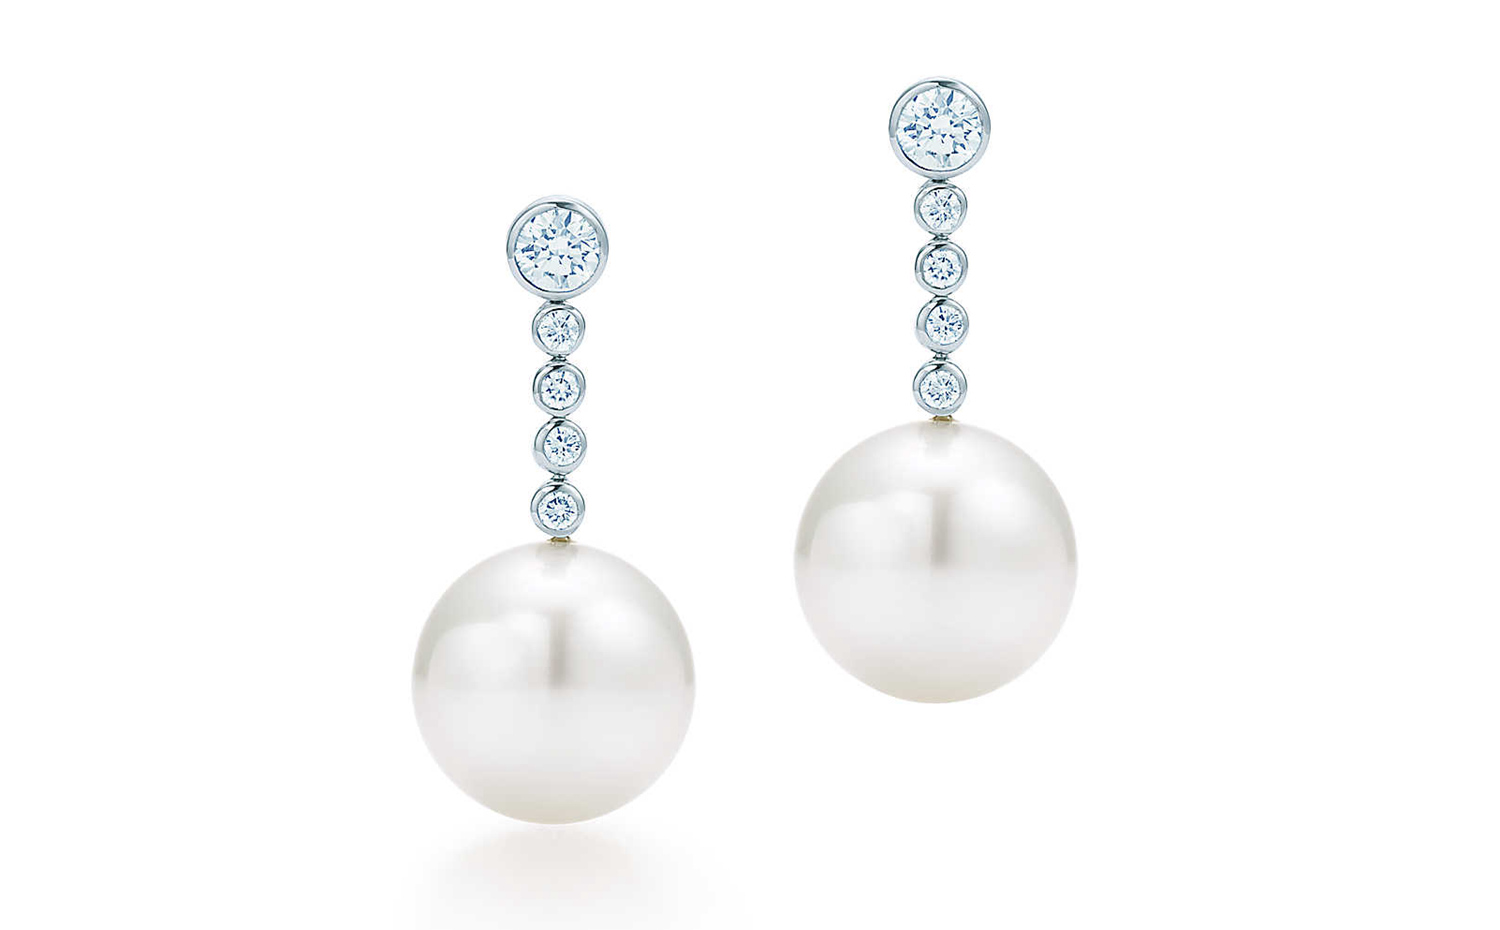 Tiffany & Co. Jazz Age Glamour South Sea cultured pearl earrings